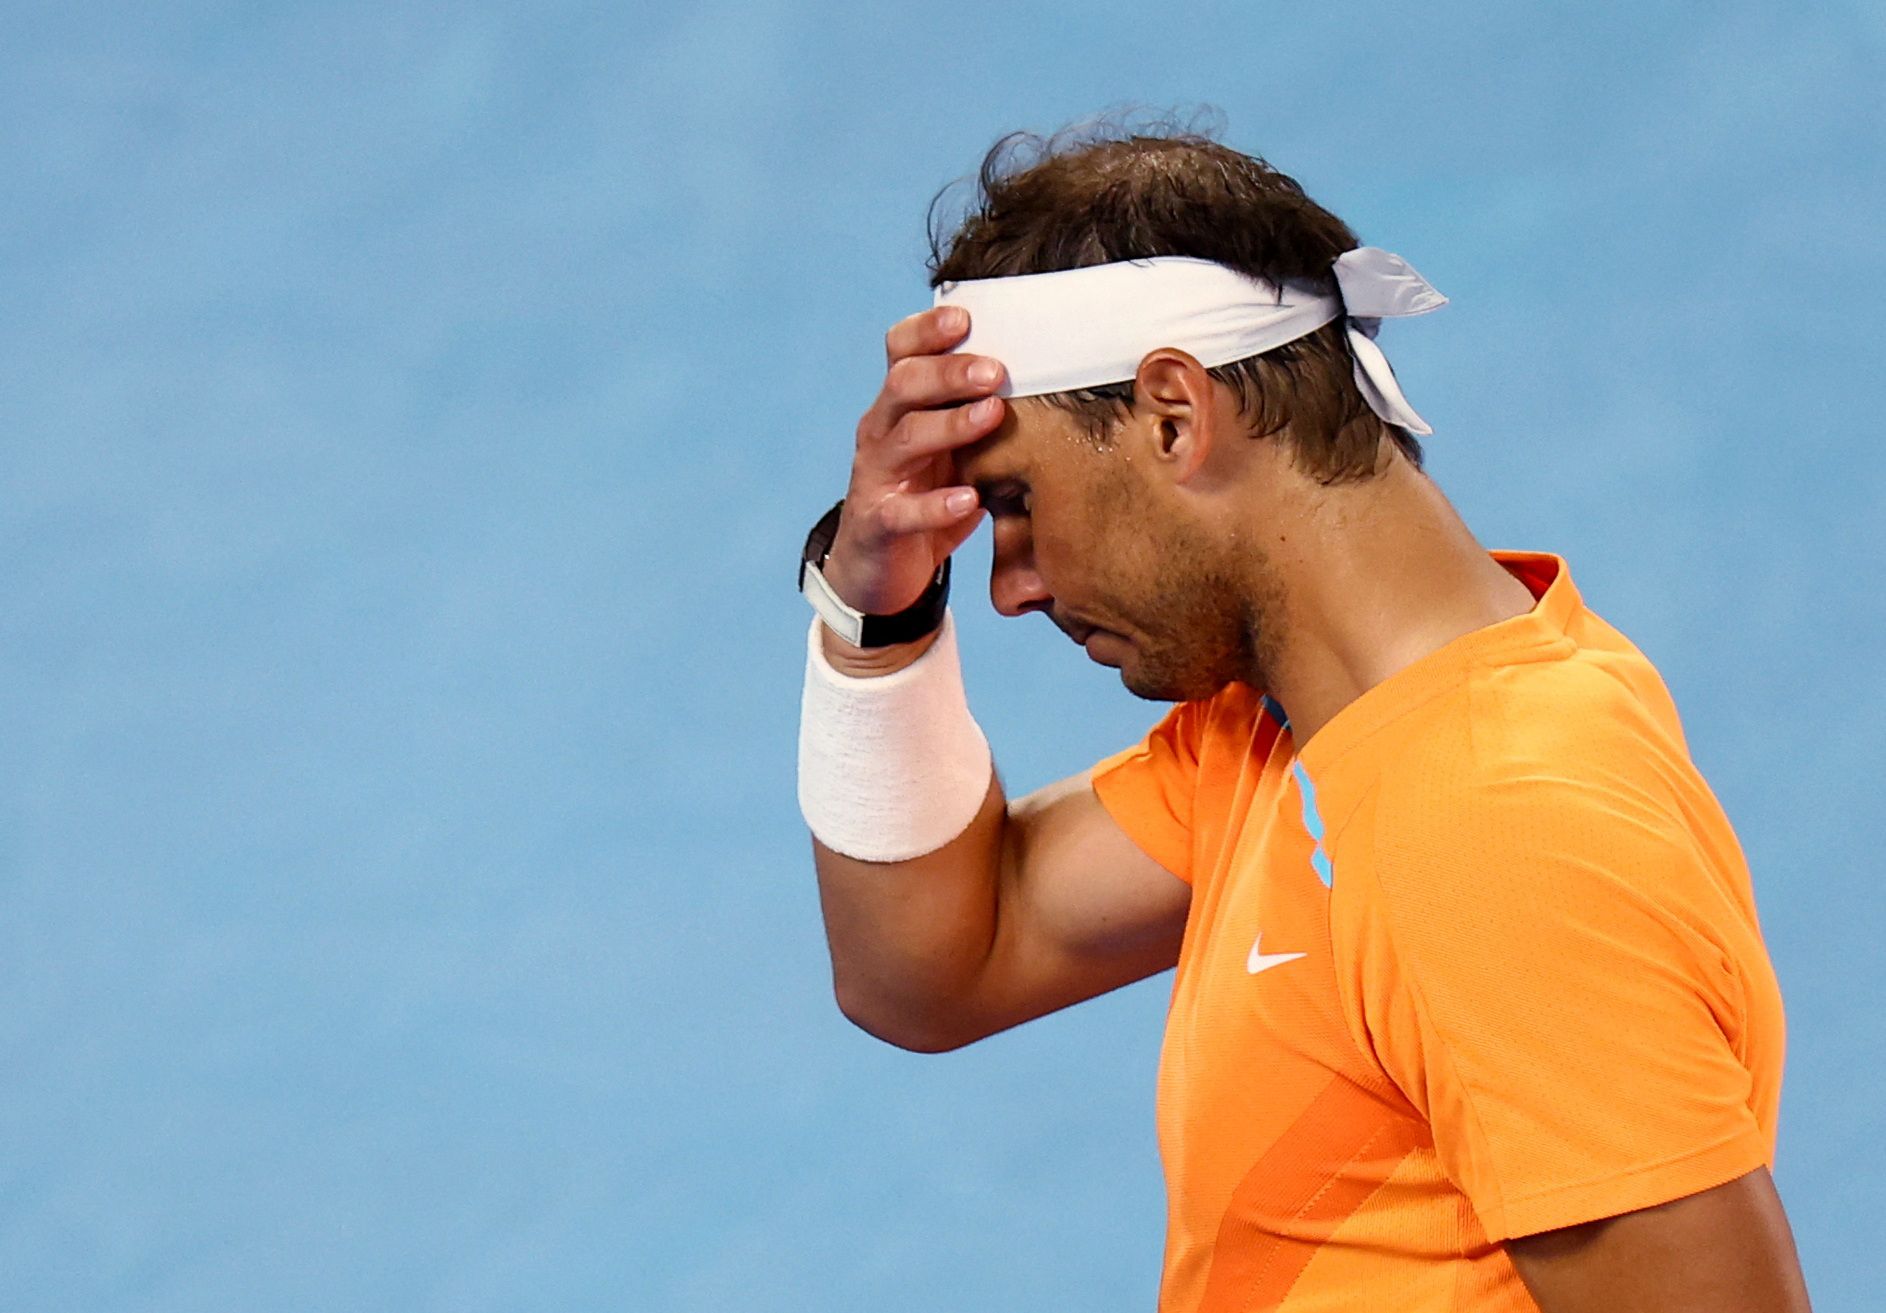 “It will be rusty now.”  Experts don’t have too much confidence in Nadal recovered, Fritz also took a dig